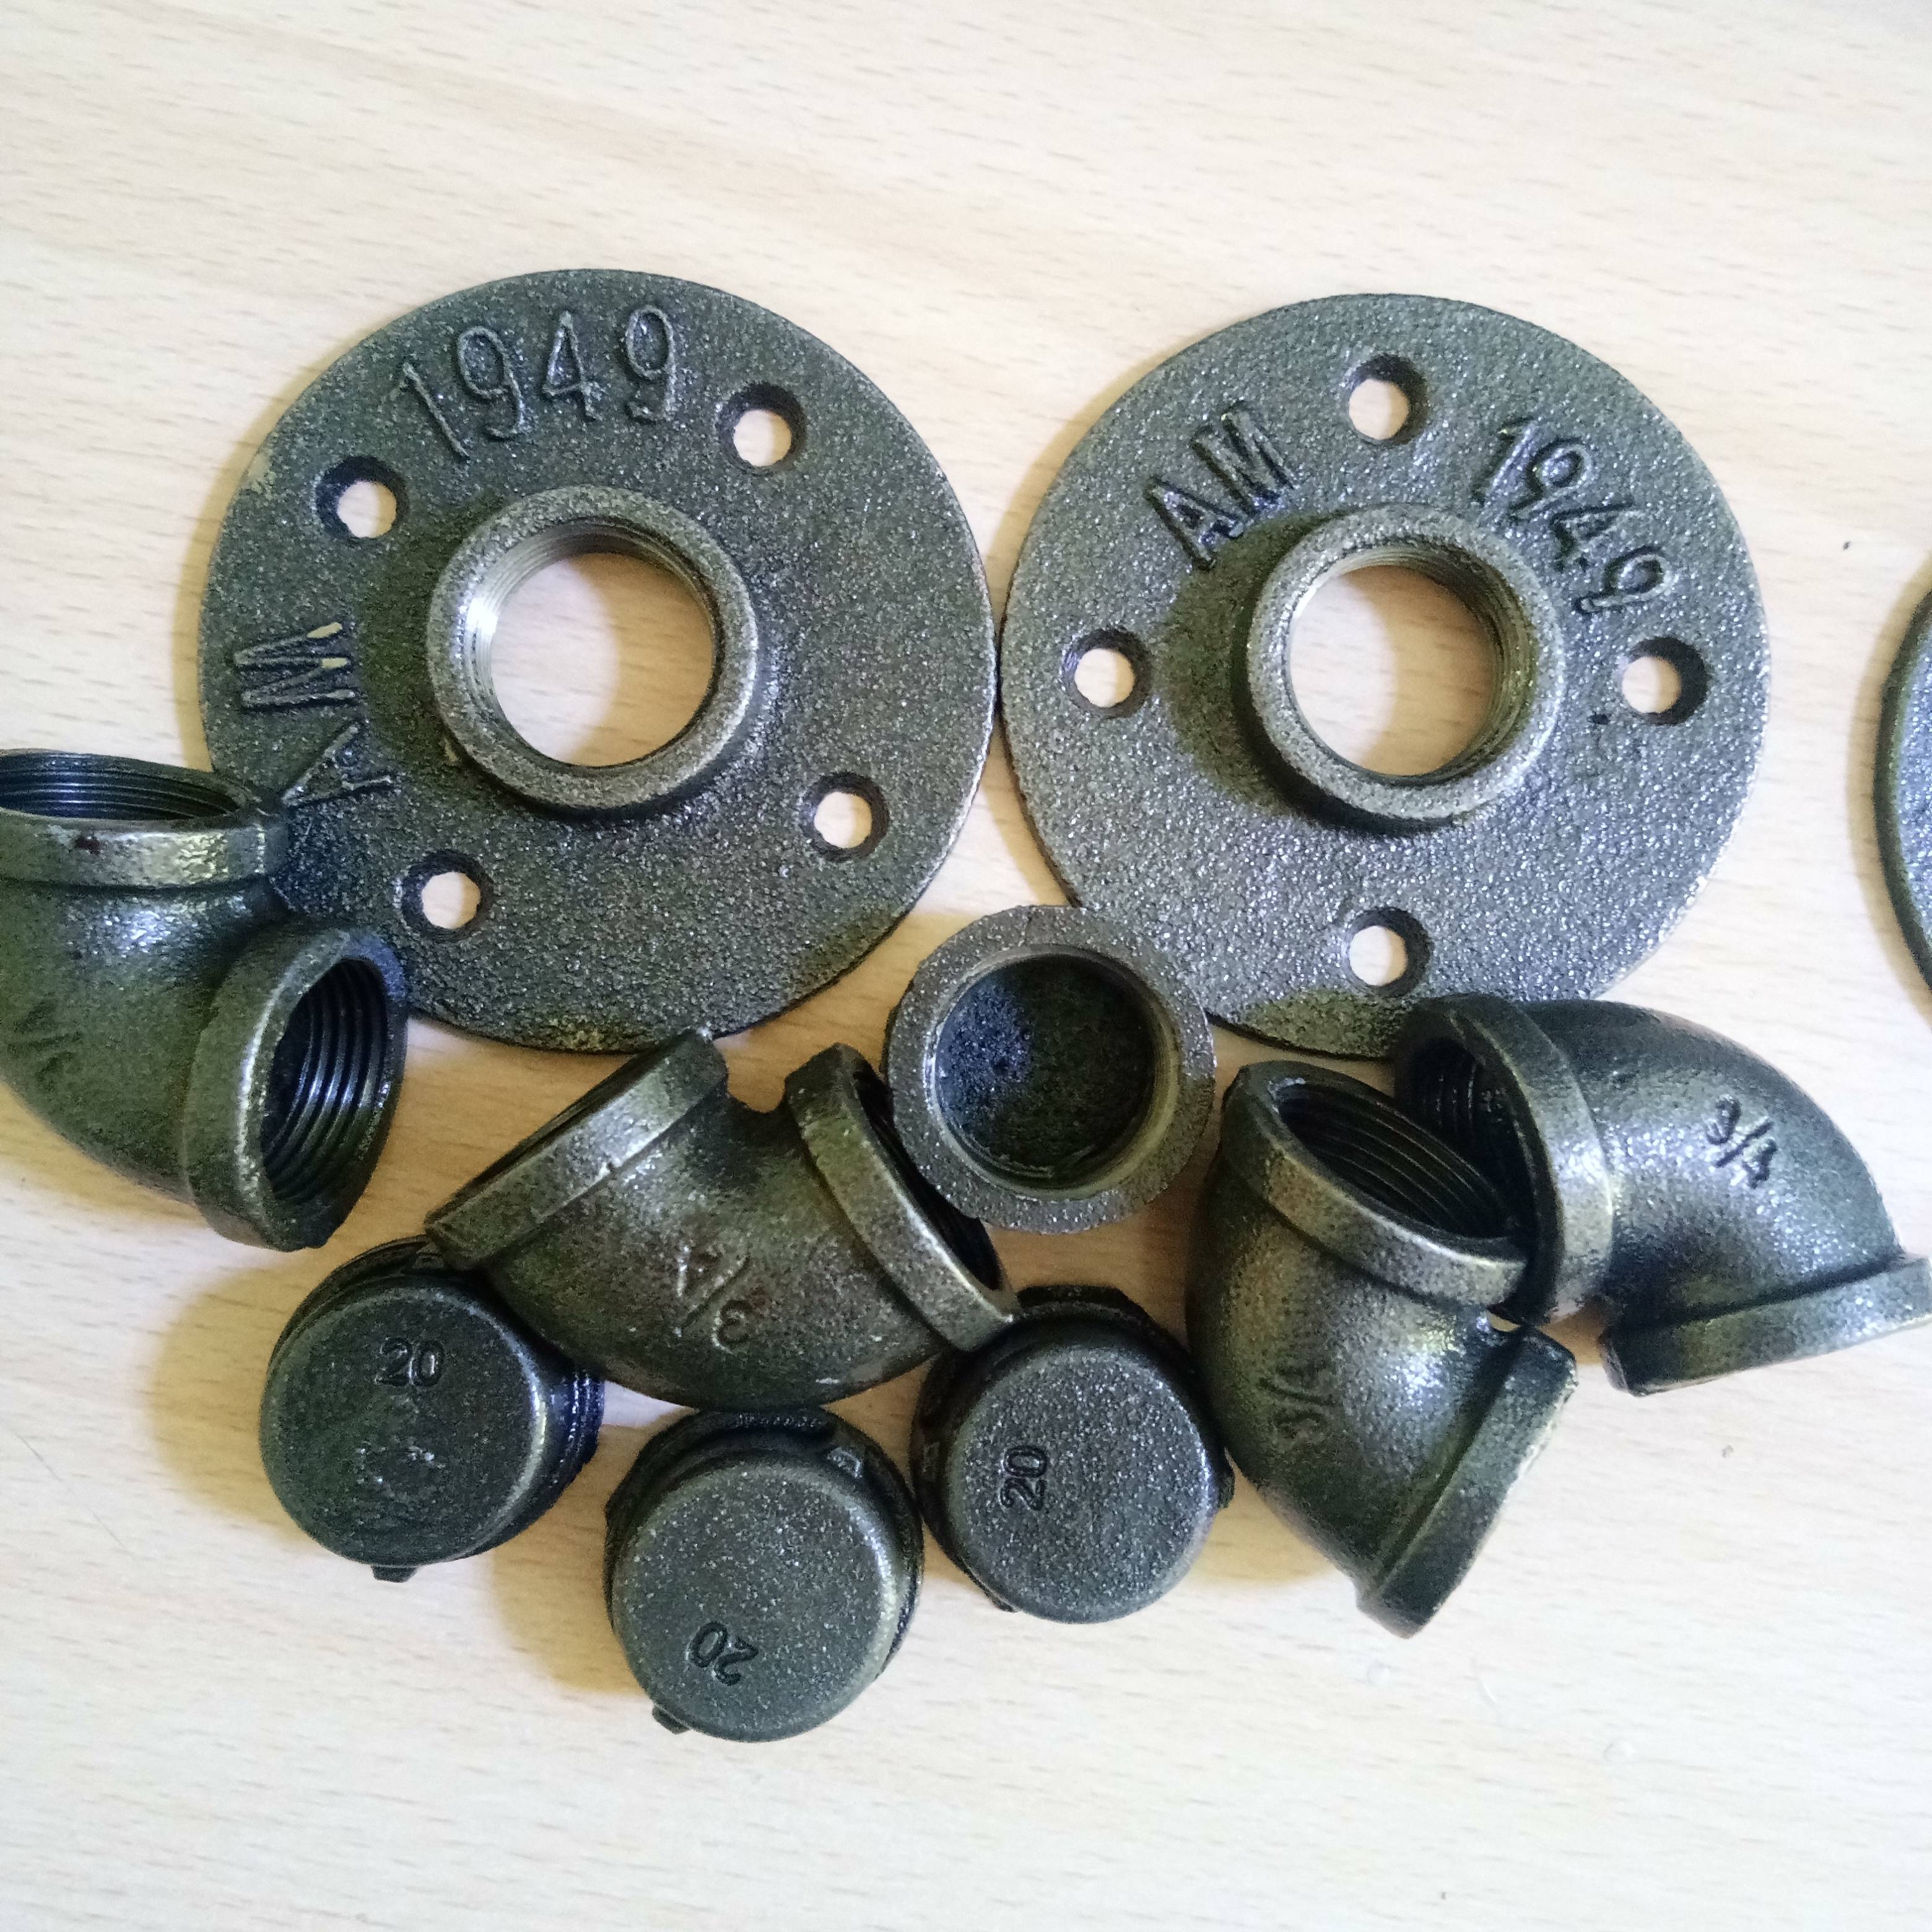 Varnish style casting iron anti-rust best quality pipe fittings